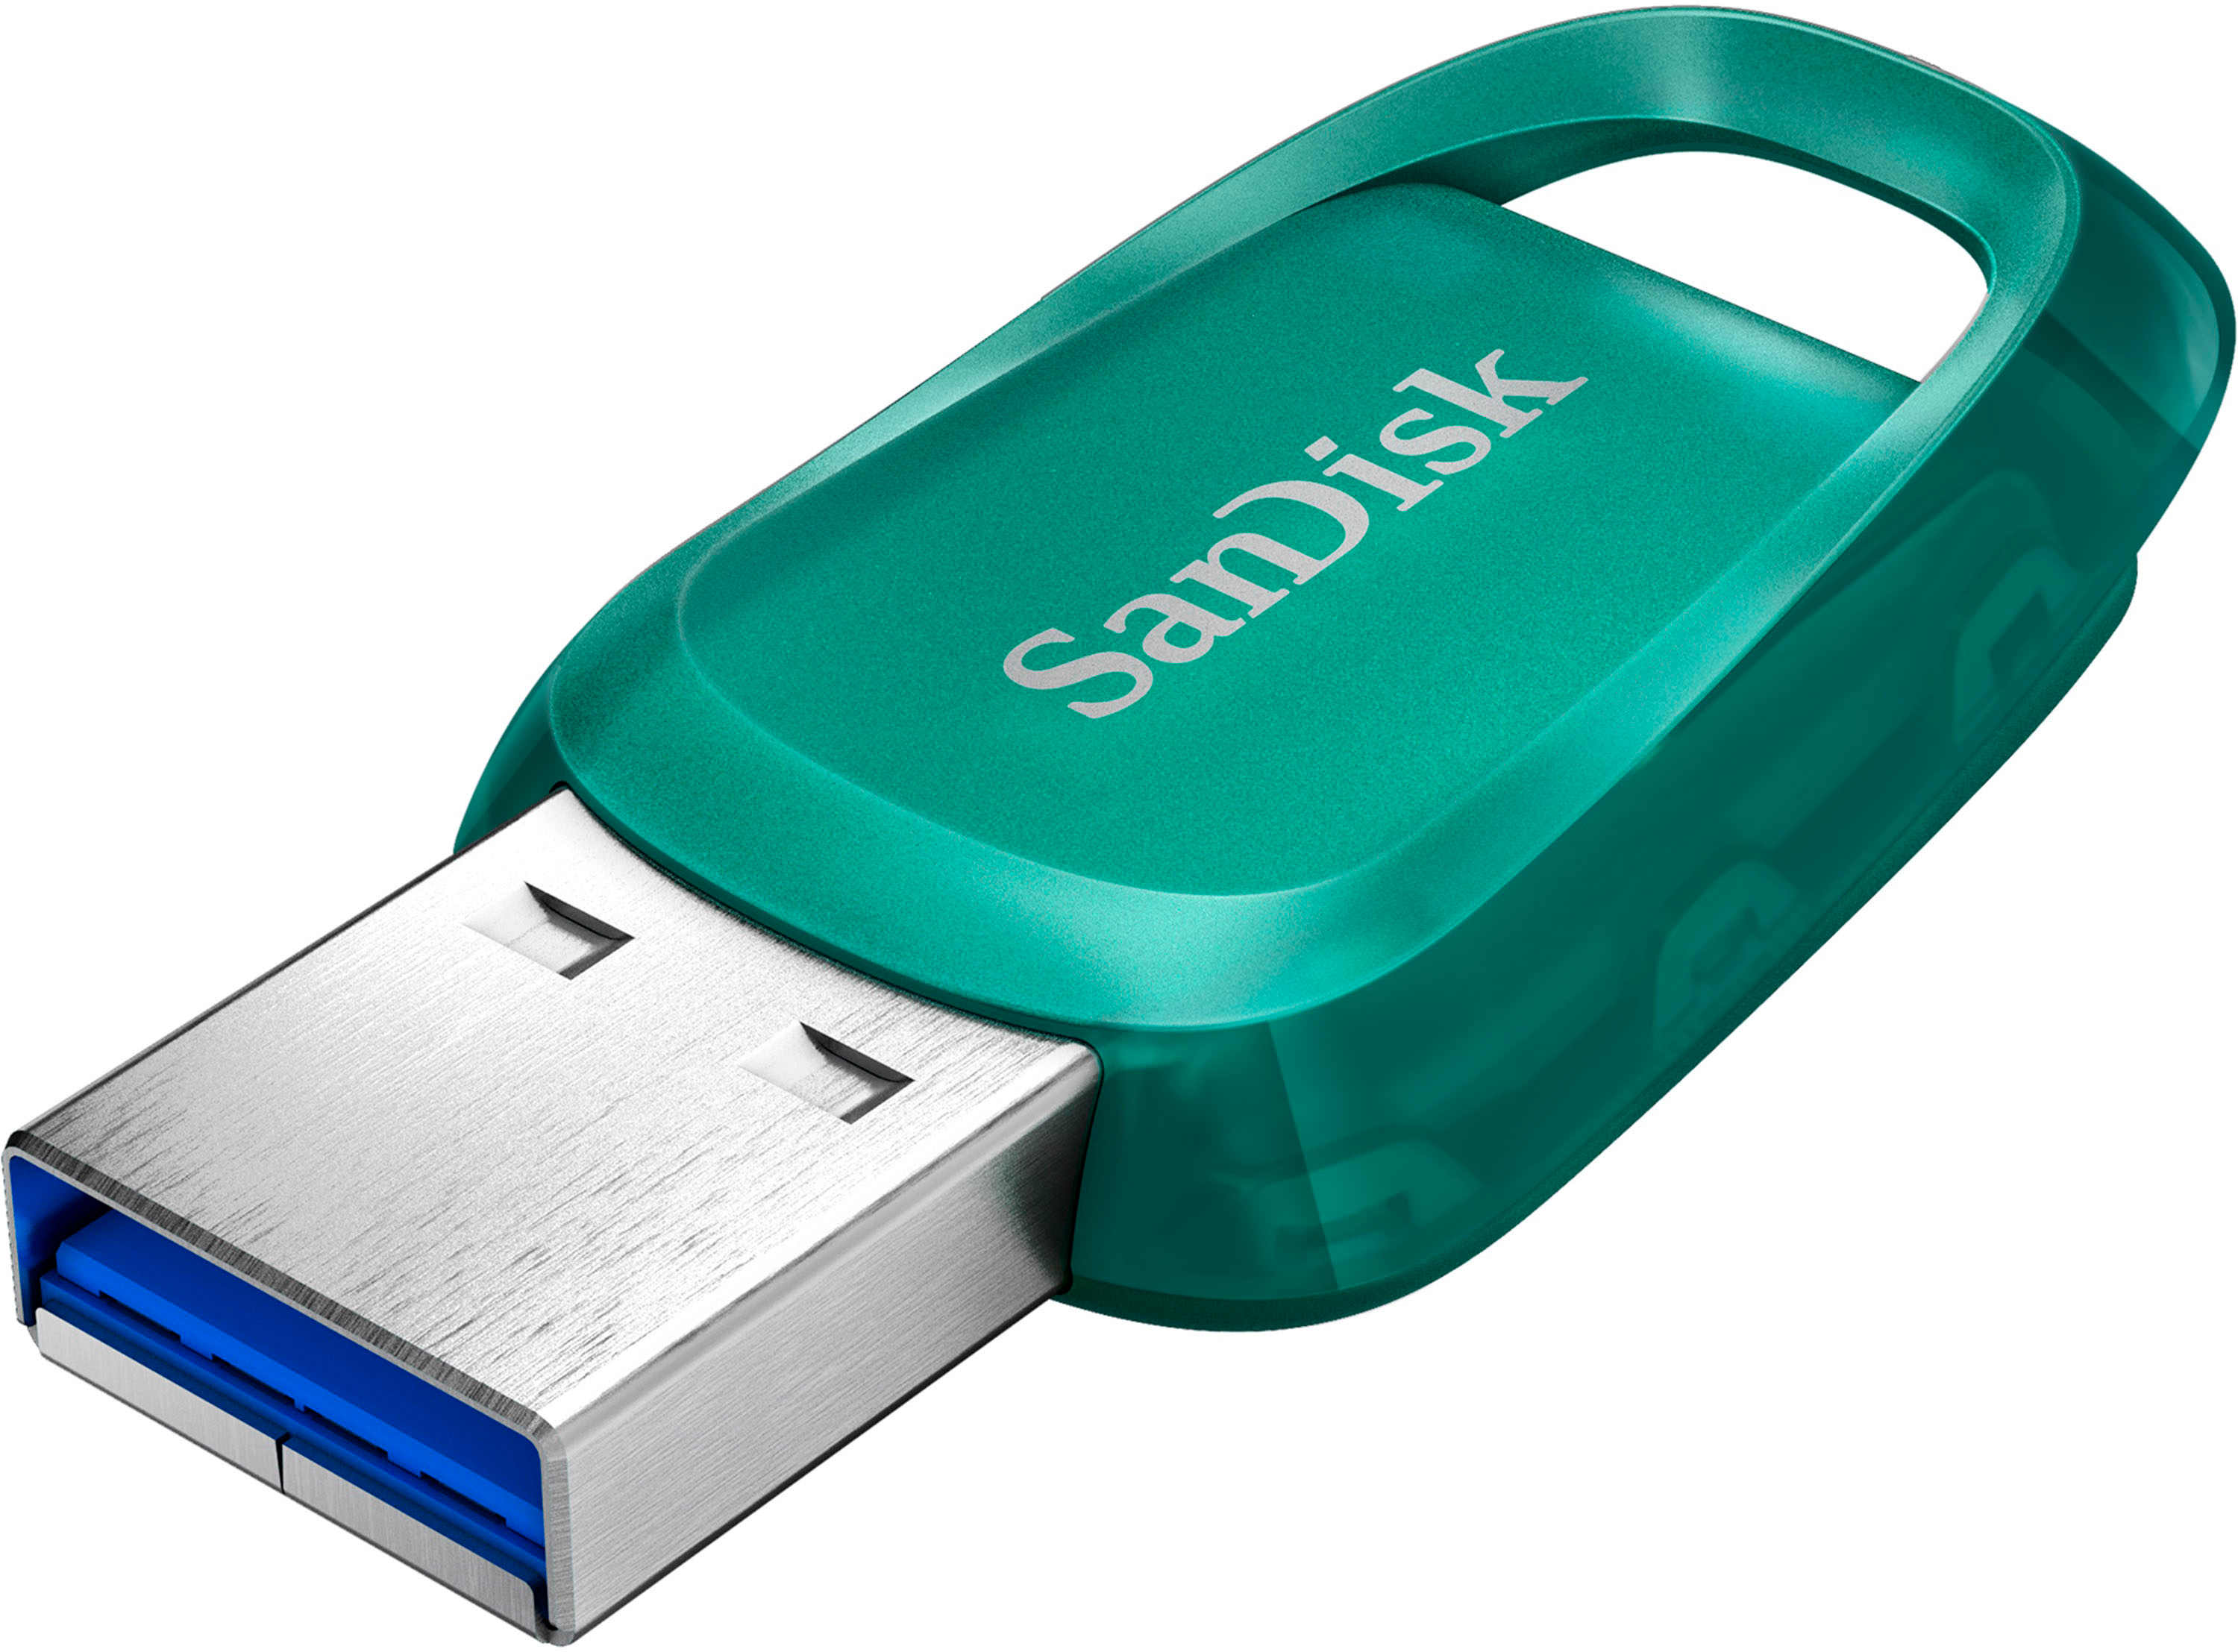 SanDisk Eco 128GB USB 3.2 Gen 1 Type-A Flash Drive Green SDCZ96-128G-A46 - Best Buy